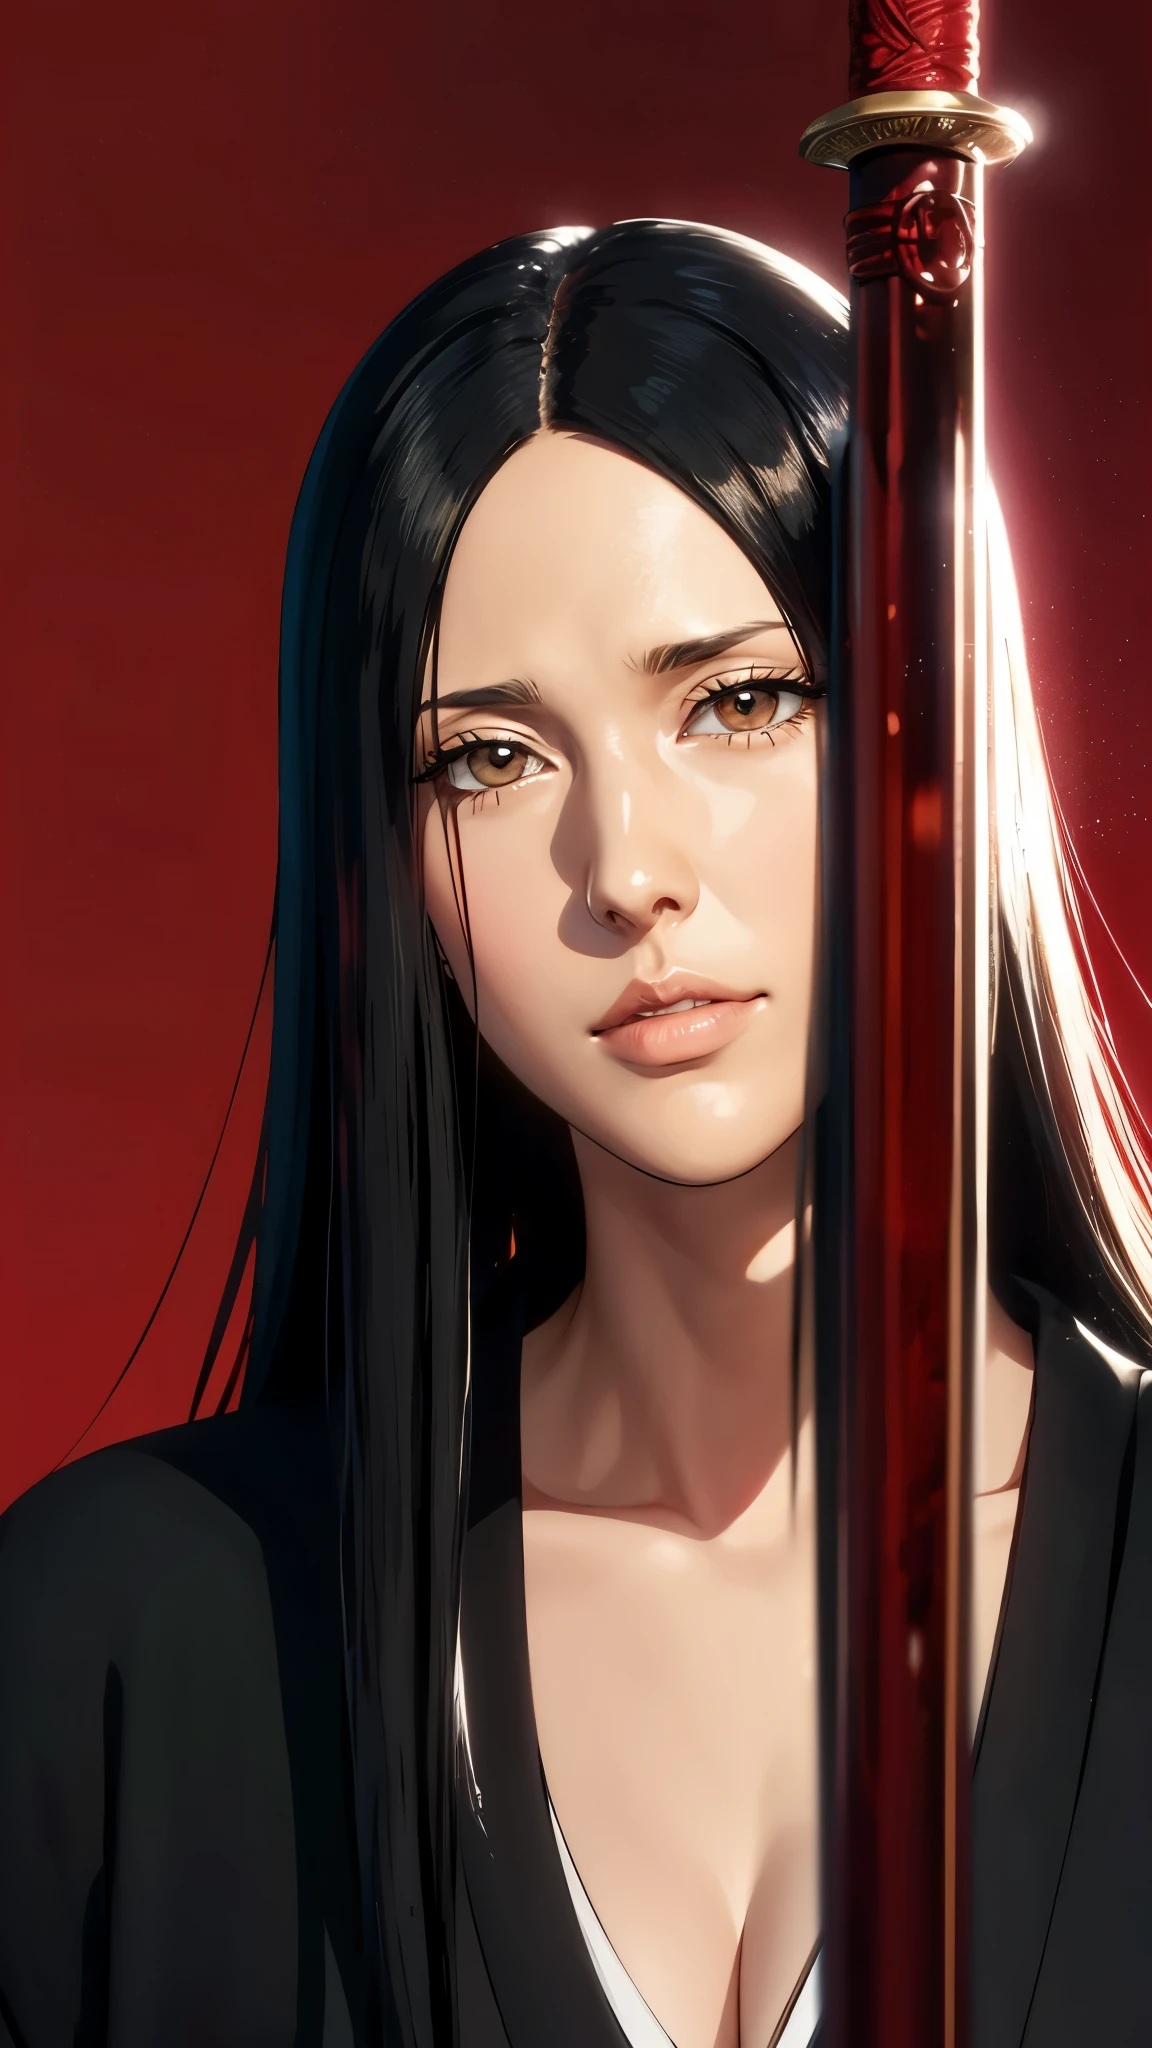 （（（Perfect figure，figure，（（（bleach，black Japanese clothing, red eyes,Unohana））），S-shaped figure:1.7））），((masterpiece)),high resolution, ((Best quality at best))，masterpiece，quality，Best quality，（（（ Exquisite facial features，looking at the audience,There is light in the eyes，Happy，nterlacing of light and shadow，））），（（（looking into camera，red background，Blood，holding sword，Holding the Blood red sword）））